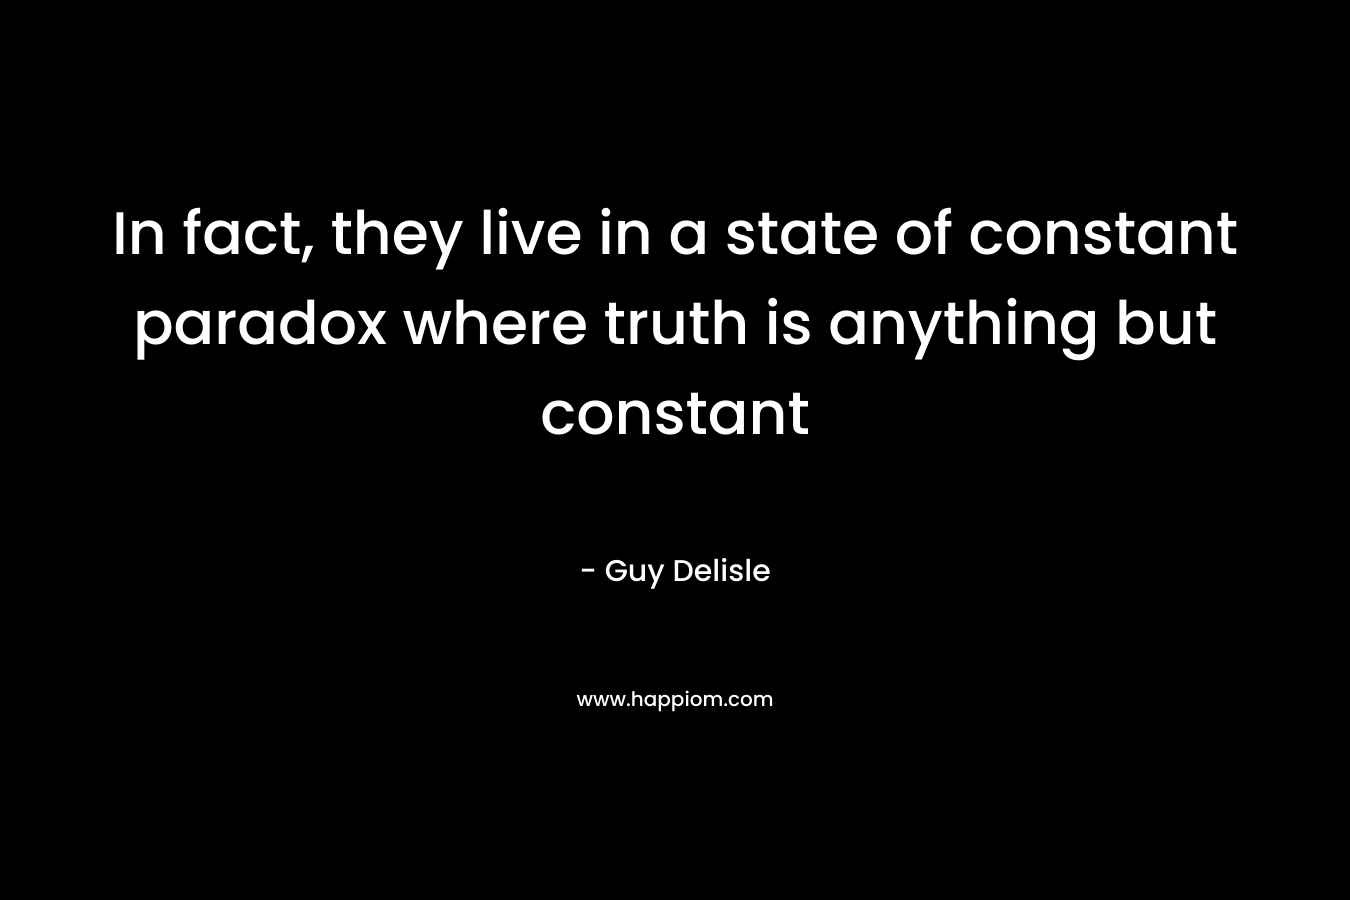 In fact, they live in a state of constant paradox where truth is anything but constant